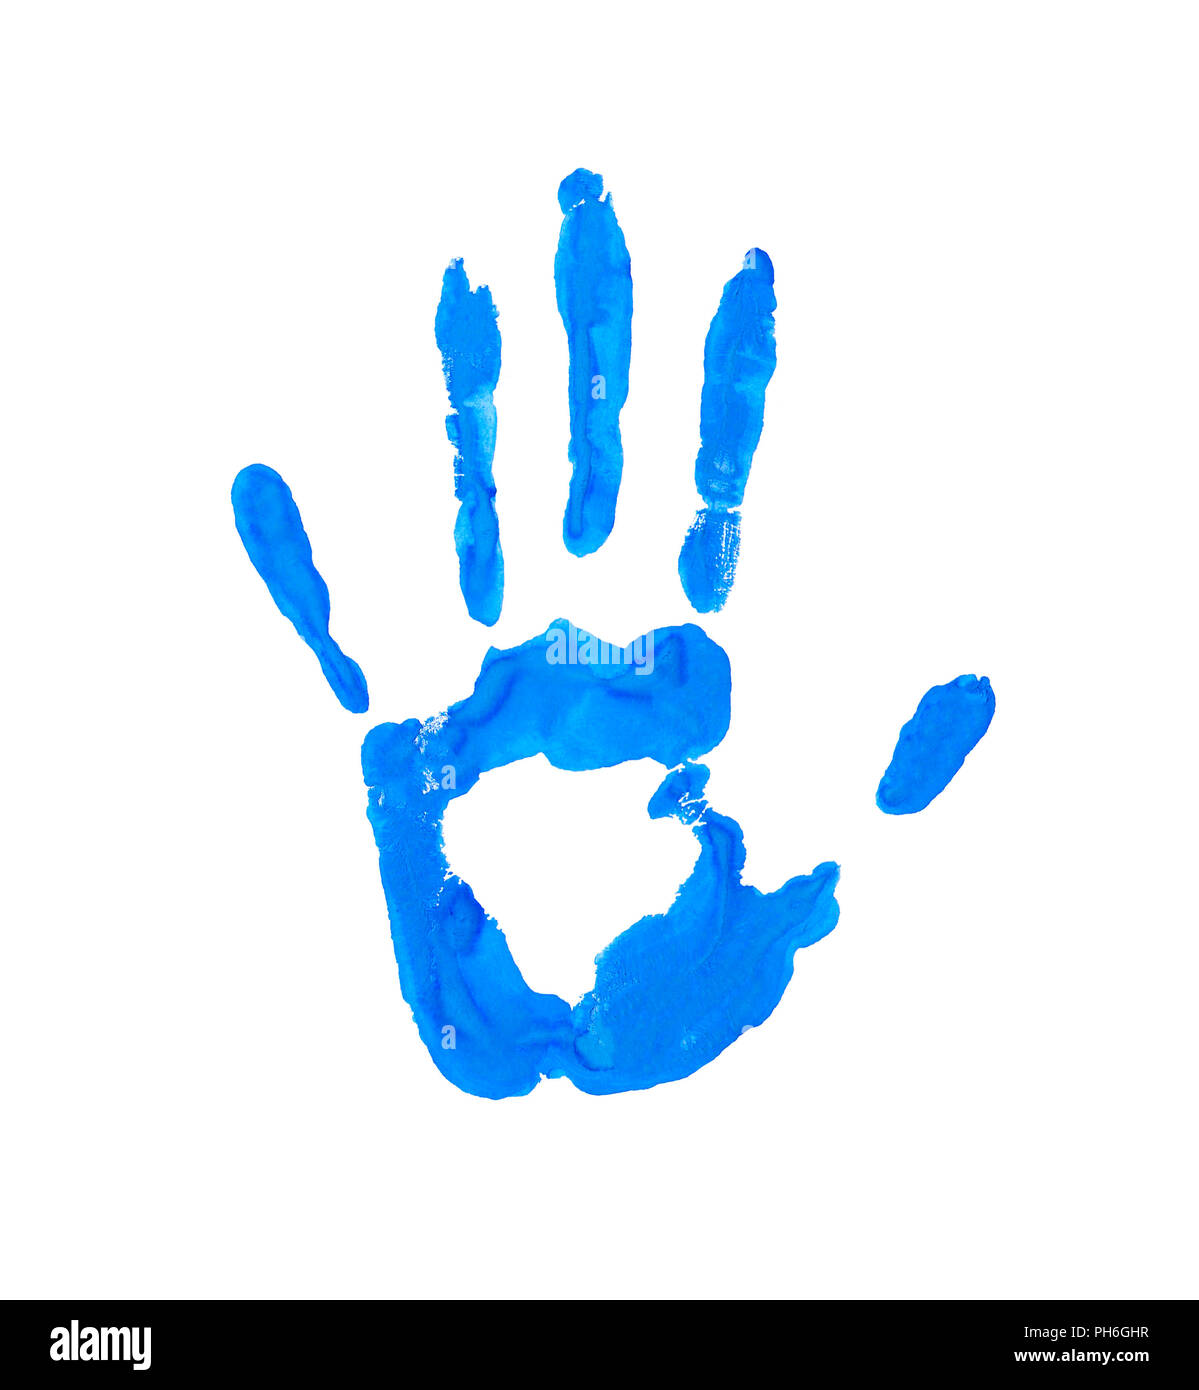 imprint of the palm. hand in paint. watercolor handprint on paper isolated. Stock Photo